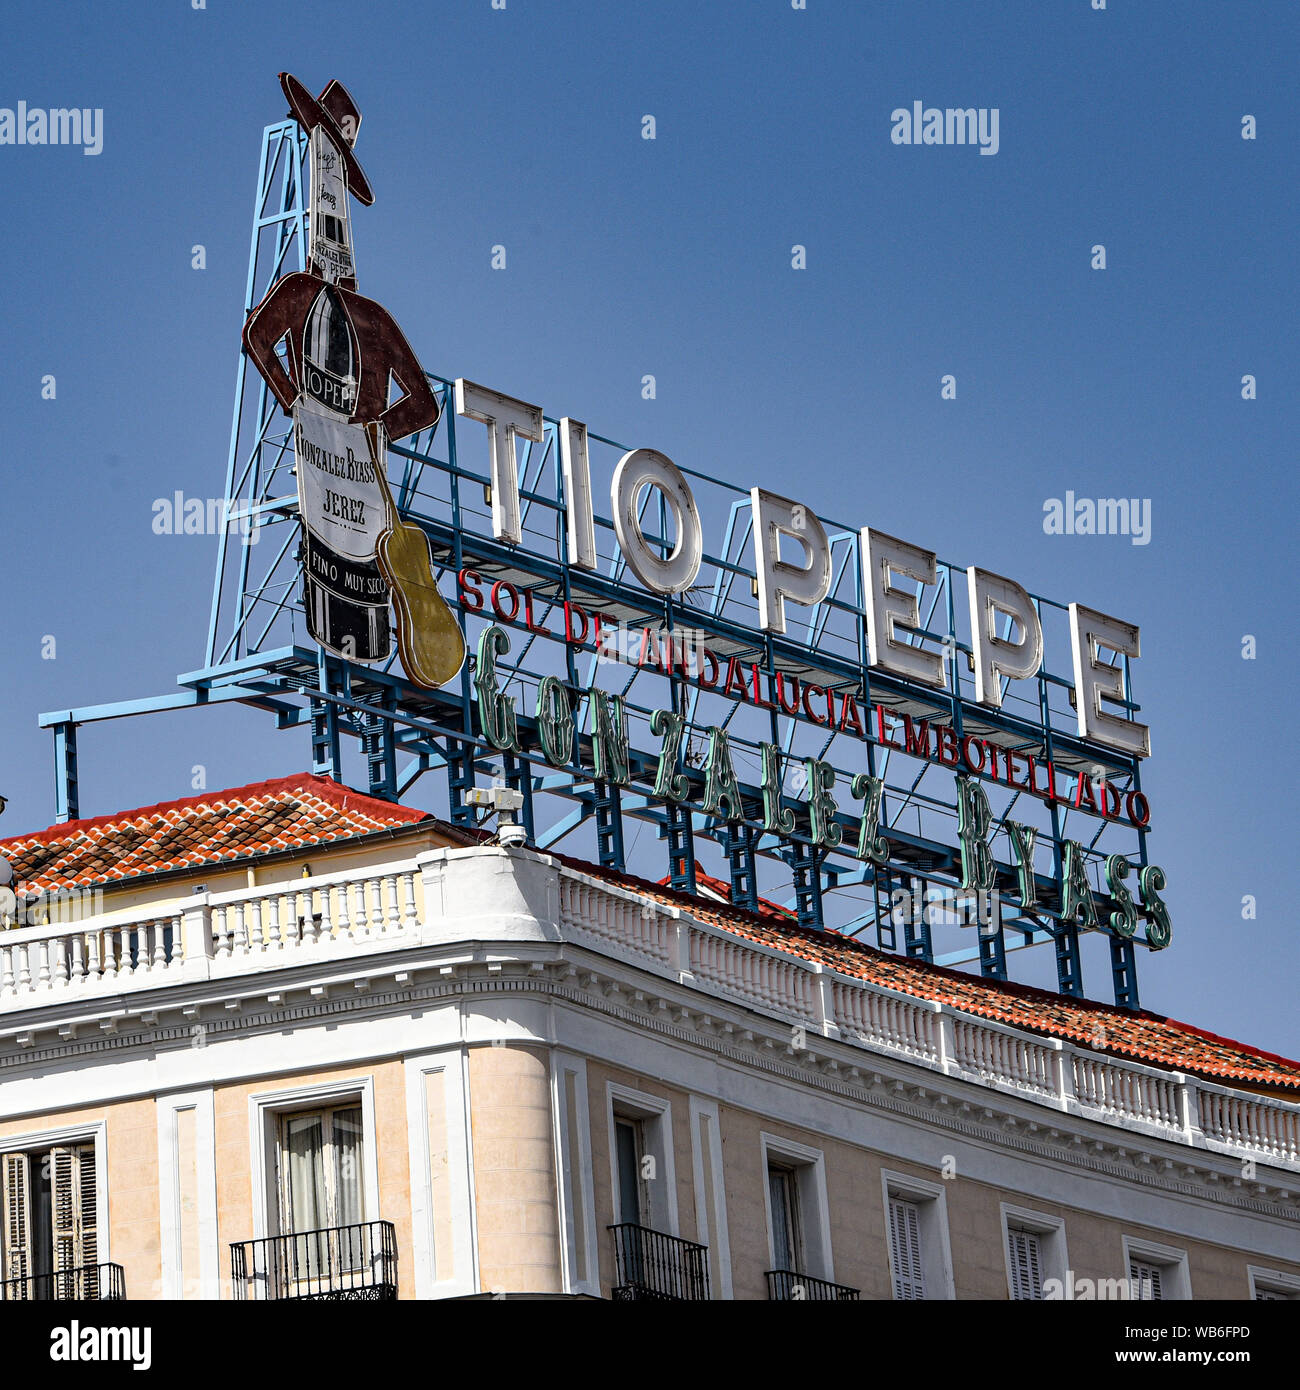 Madrid, Spain -July 22, 2019: Neon sign above Puerta del Sol public square Stock Photo